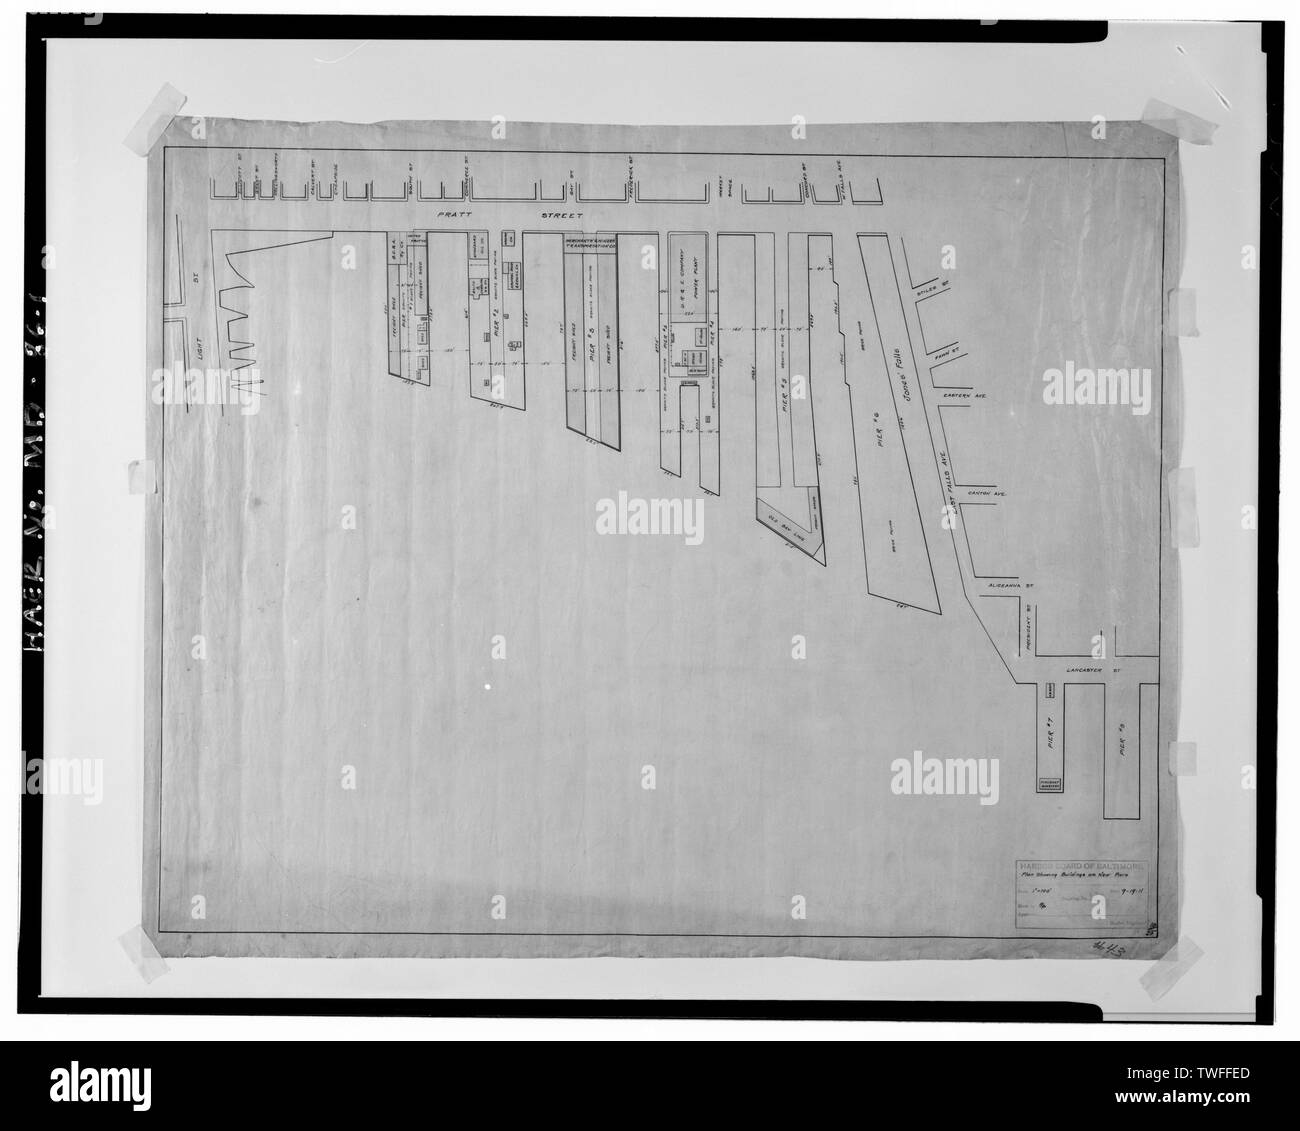 PLAN SHOWING BUILDINGS ON NEW PIERS- 1 in. = 100 ft. (Sept. 19, 1911), Made by RP - Baltimore Inner Harbor, Northwest branch of Patapsco River south of Pratt Street and between Light Street and Jones Falls, Baltimore, Independent City, MD; Hutton, N H; Baltimore Harbor Board; Lackey, Oscar F; City of Baltimore; Christopher Columbus Center Development, Incorporated, sponsor; Bird, Betty, historian; Hoachlander, Anice, photographer Stock Photo